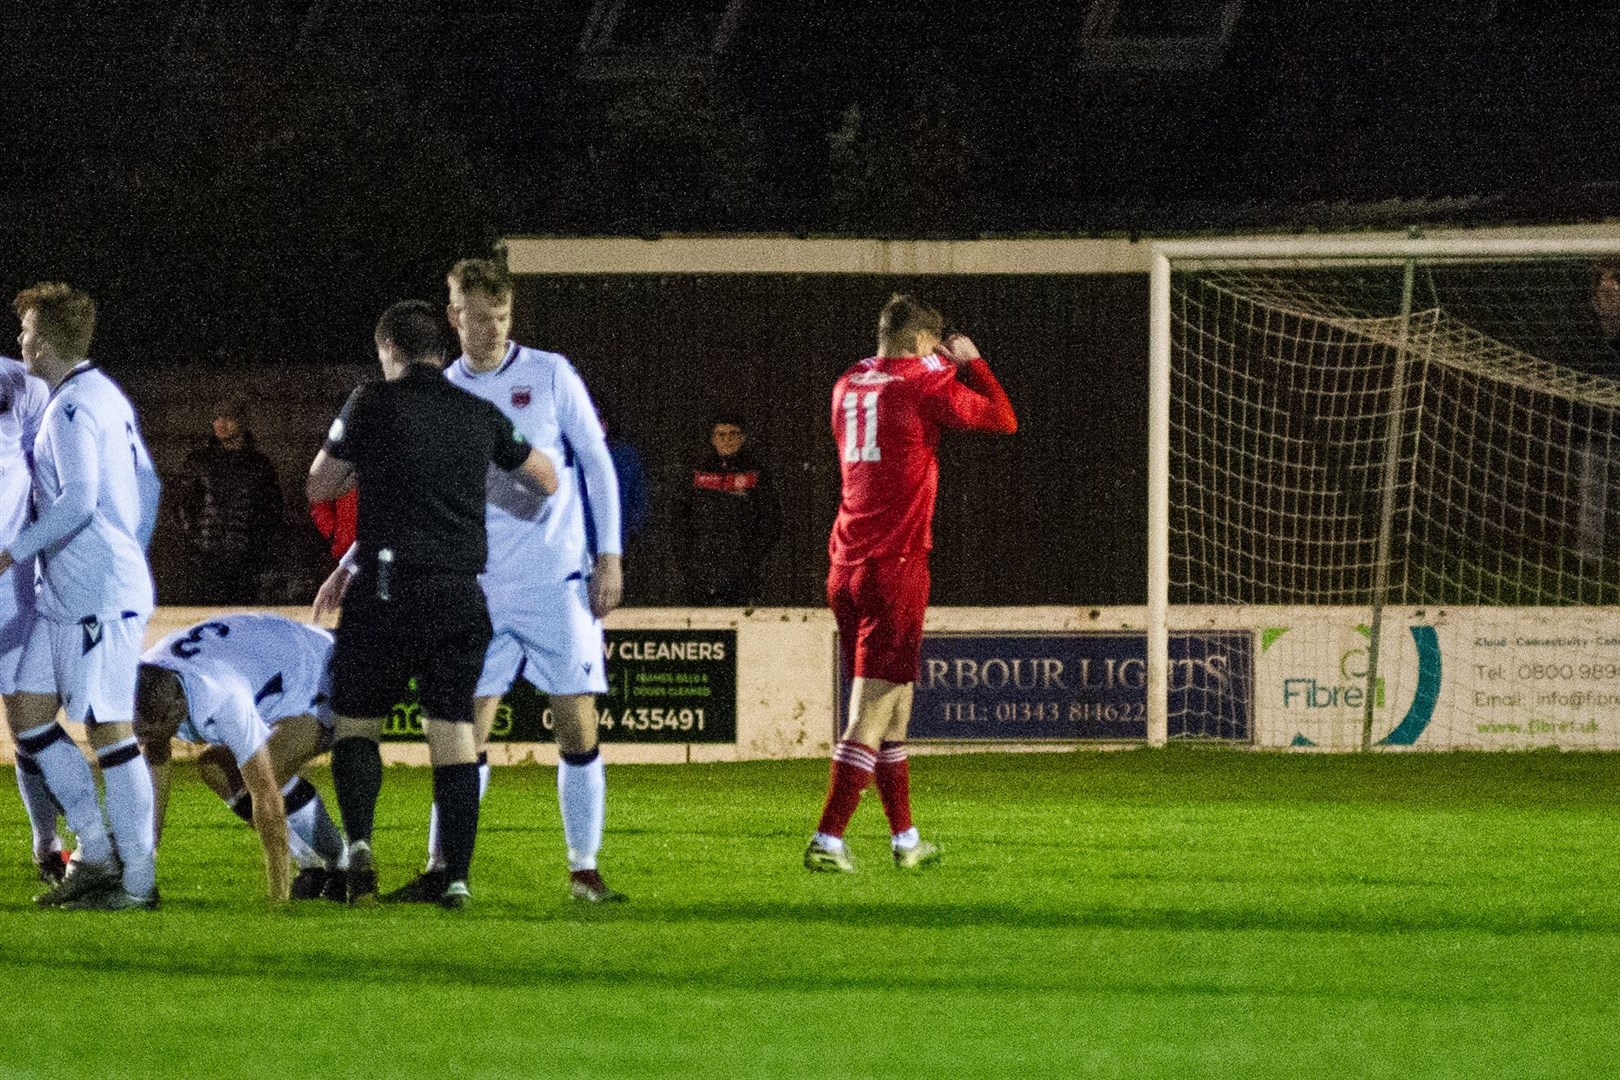 Lossiemouth FC forward Ross Elliot is sent for an early shower by referee Lee Robertson.